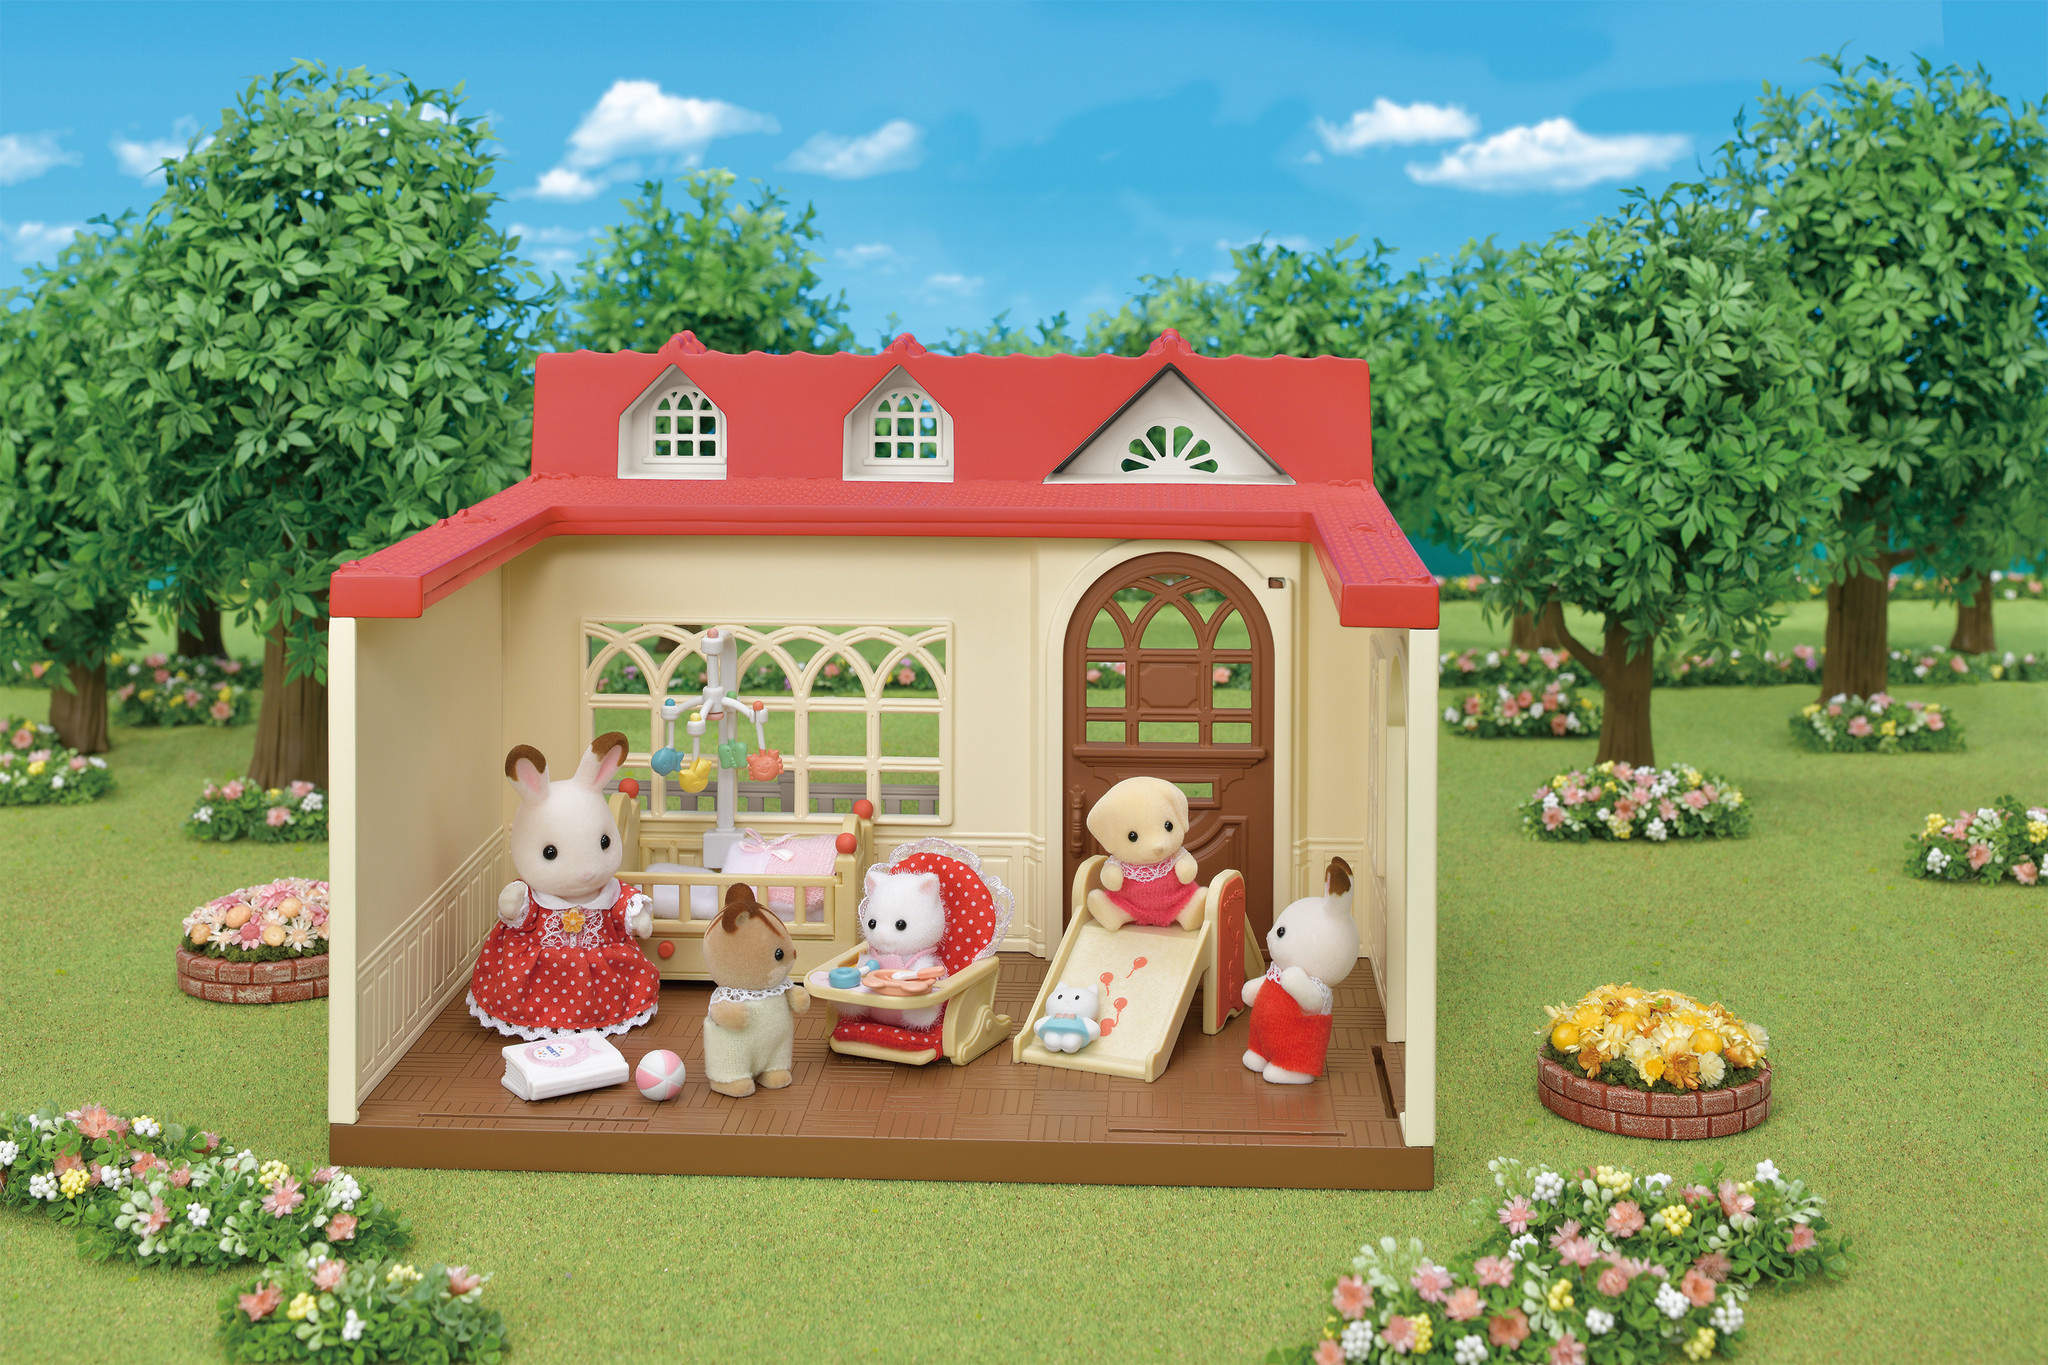 Sweet Raspberry Home CC - Mudpuddles Toys and Books